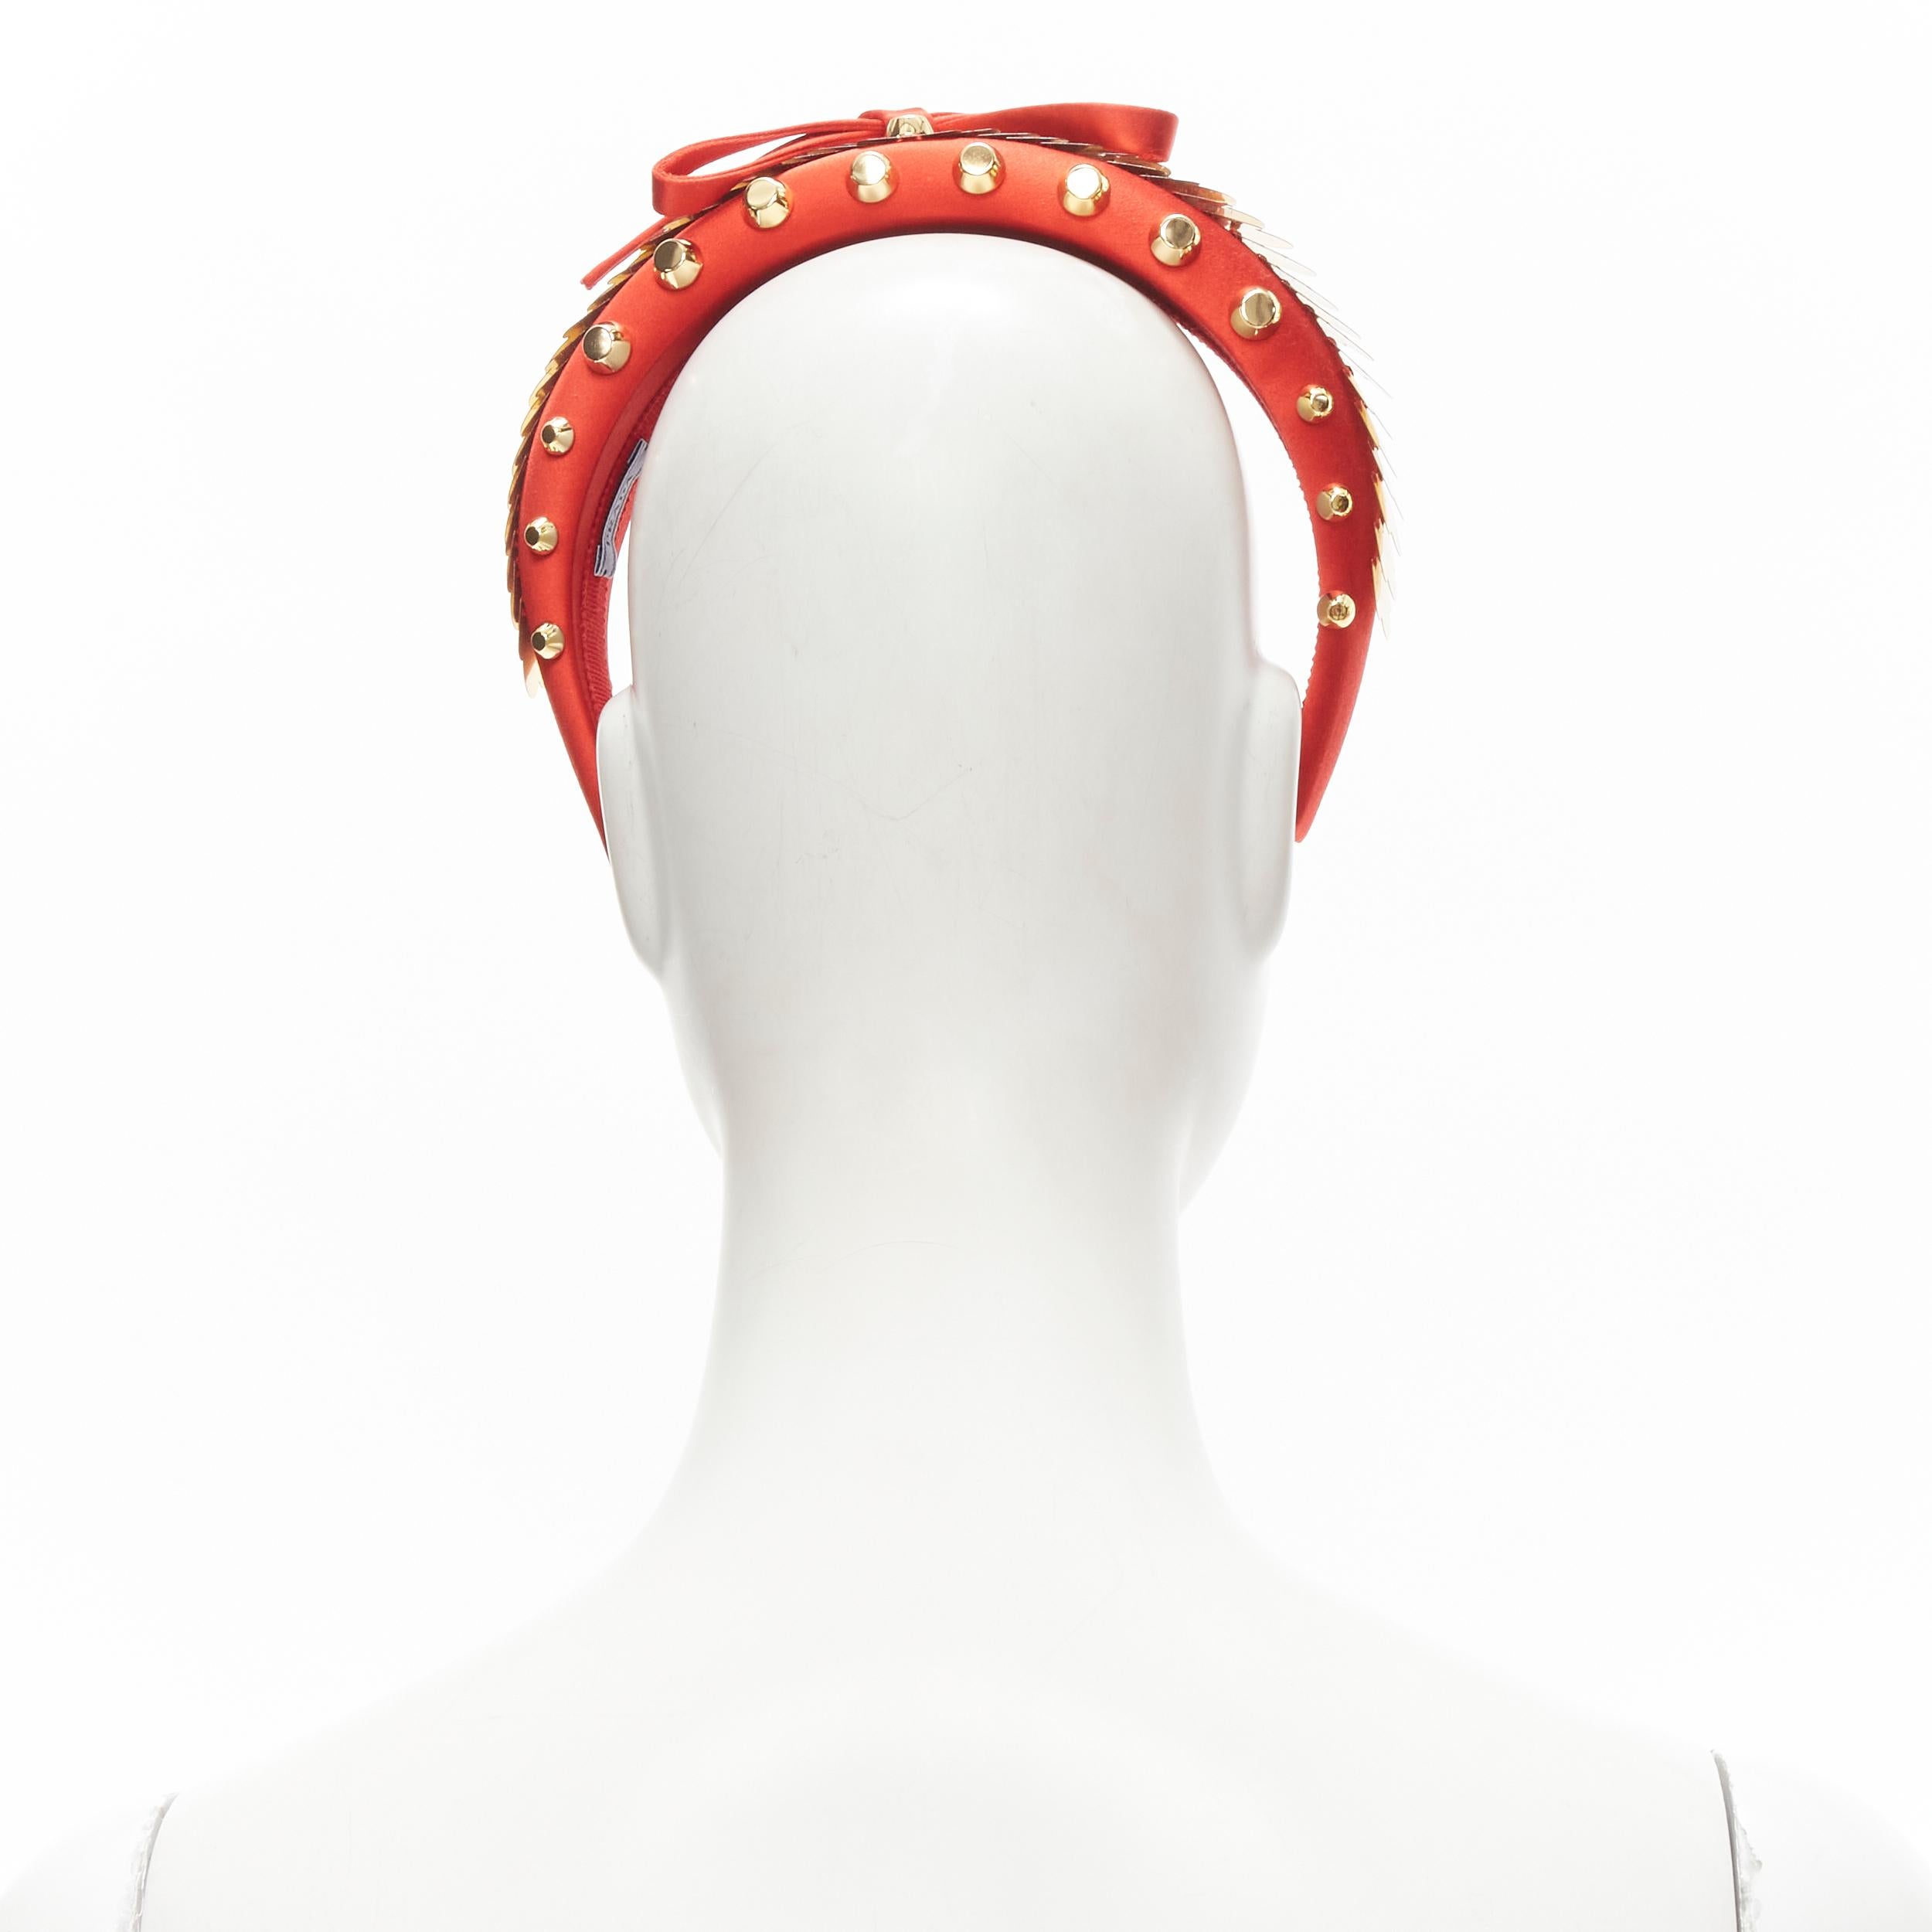 Beige PRADA red satin gold pailette studded bow puffy headband For Sale